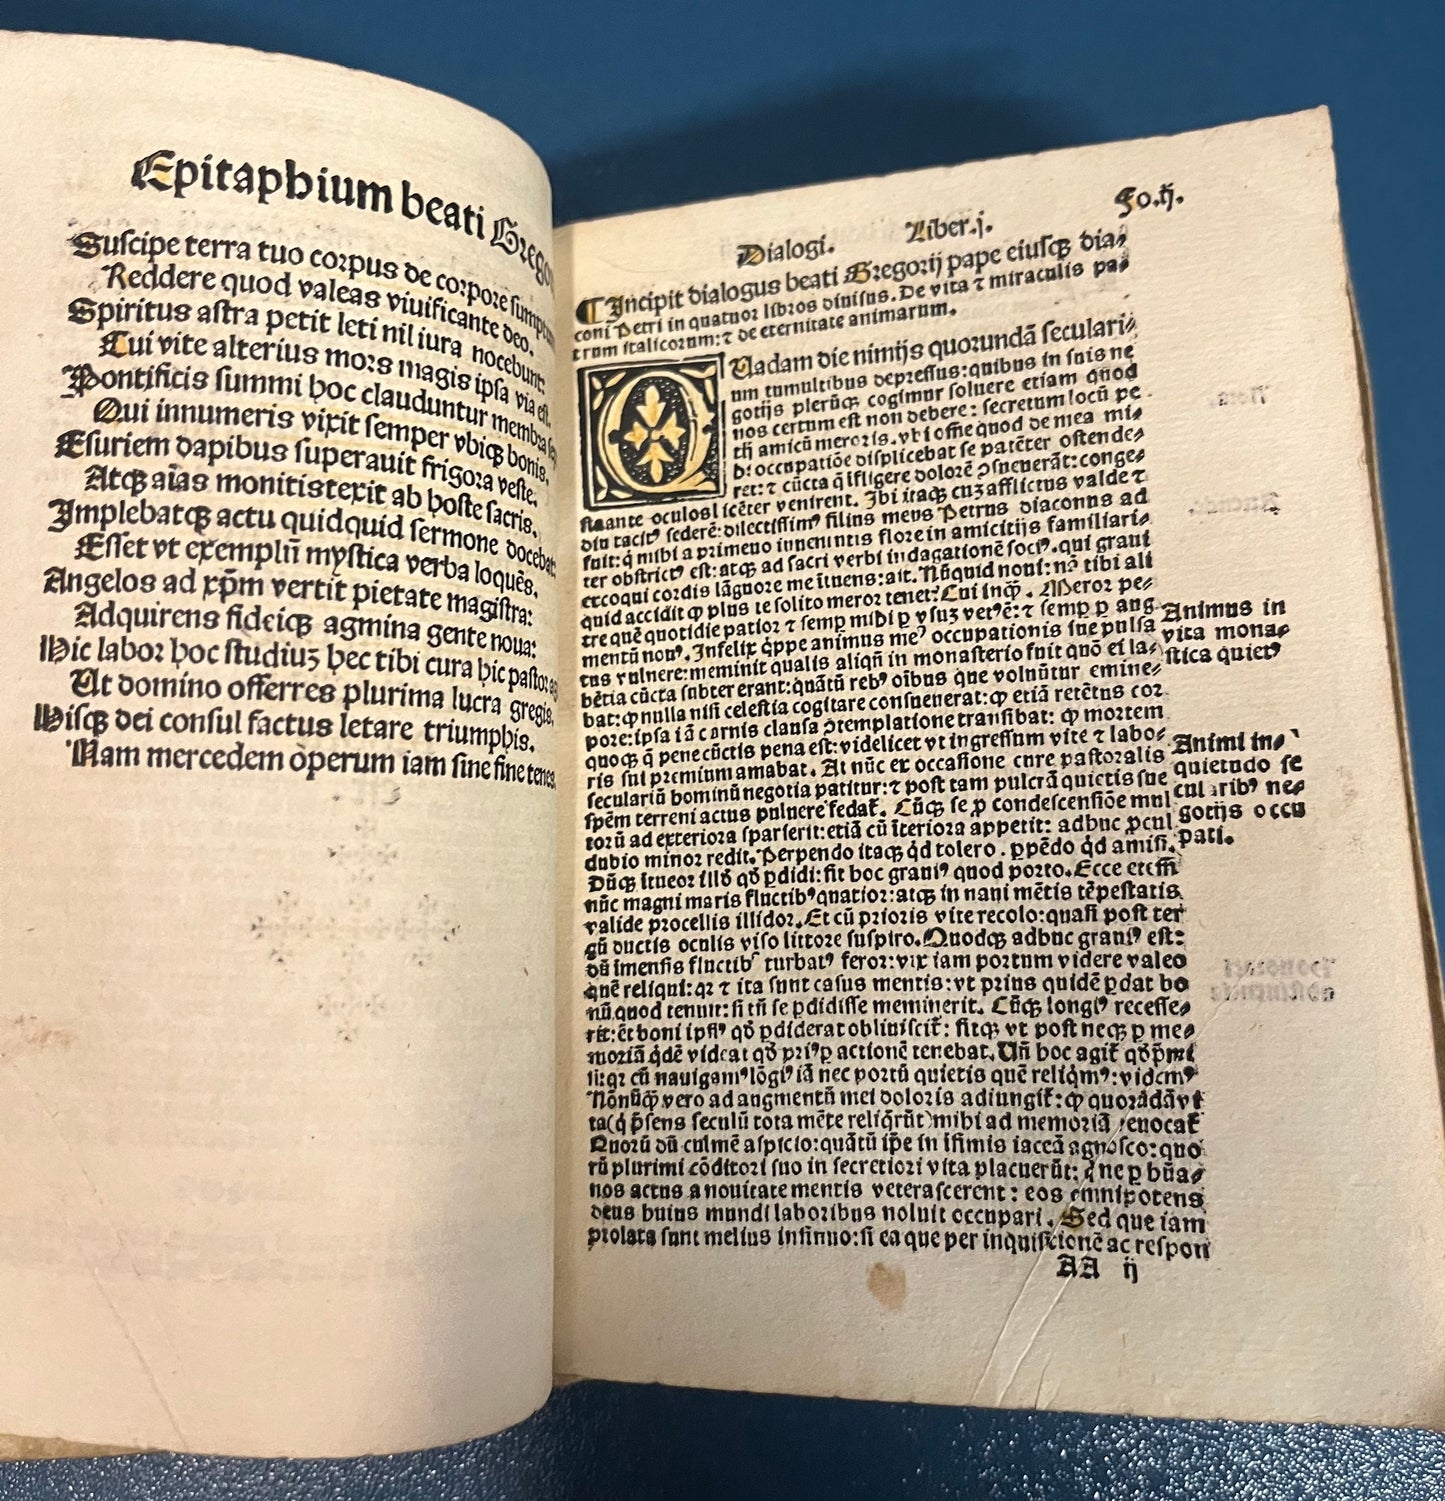 Pastoralis cure liber - 1516 - with 14th Century manuscript fly leaves